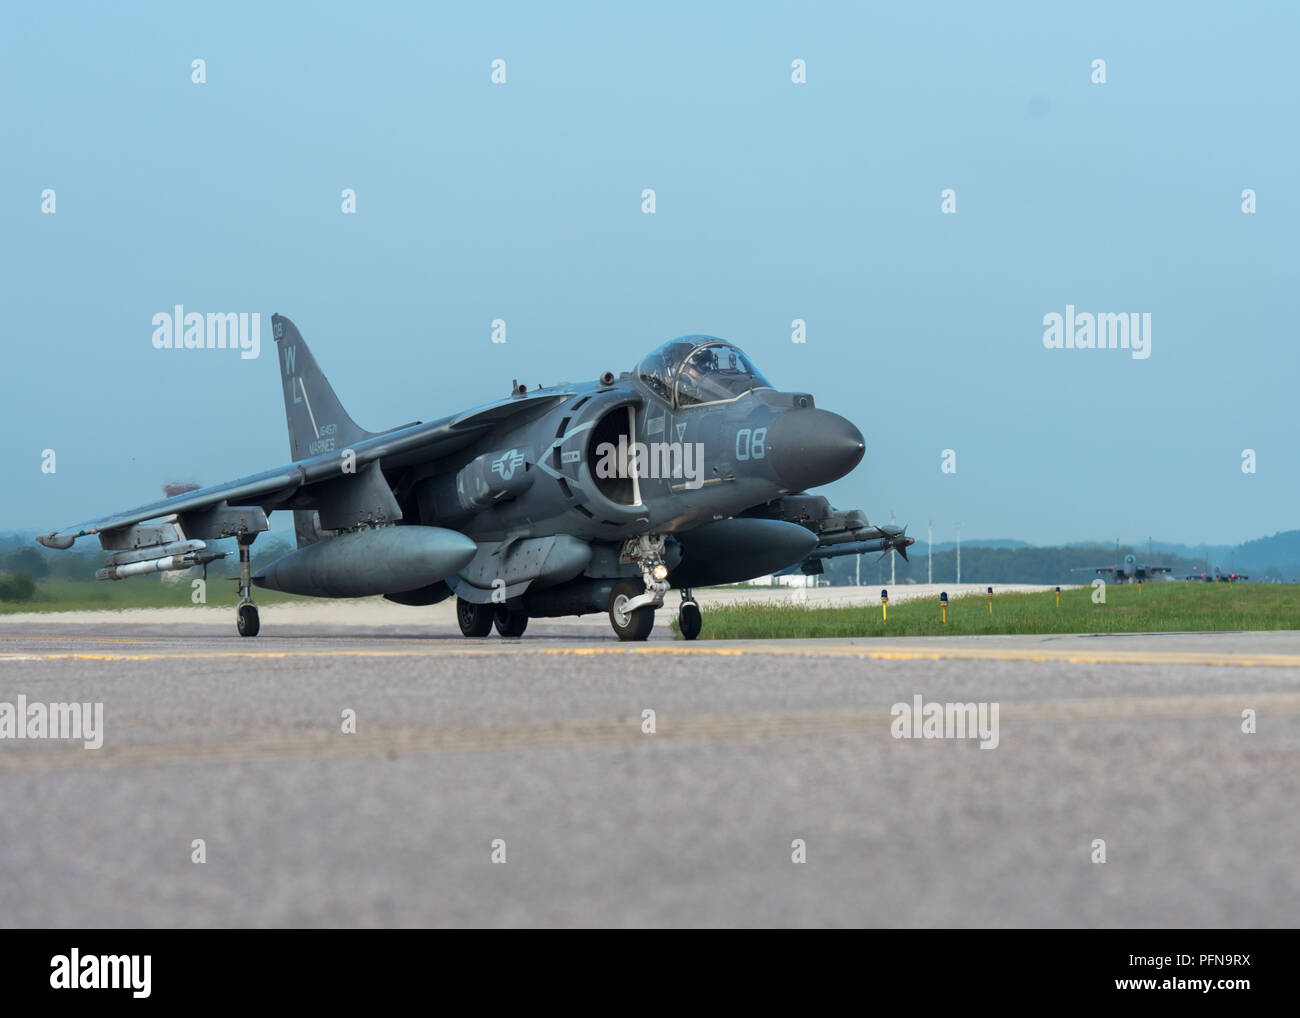 A U.S. Marine Corps AV-8B Harrier II taxis out to the runway at Volk Field Air National Guard Base, Wisconsin, during the Northern Lightning 18-2 Exercise Aug. 17, 2018. Volk field provides a year-round integrated training environment, which includes airspace, facilities, and equipment, for units to enhance their combat capabilities and readiness.(U.S. Air National Guard photo by Airman 1st Class Cameron Lewis) Stock Photo